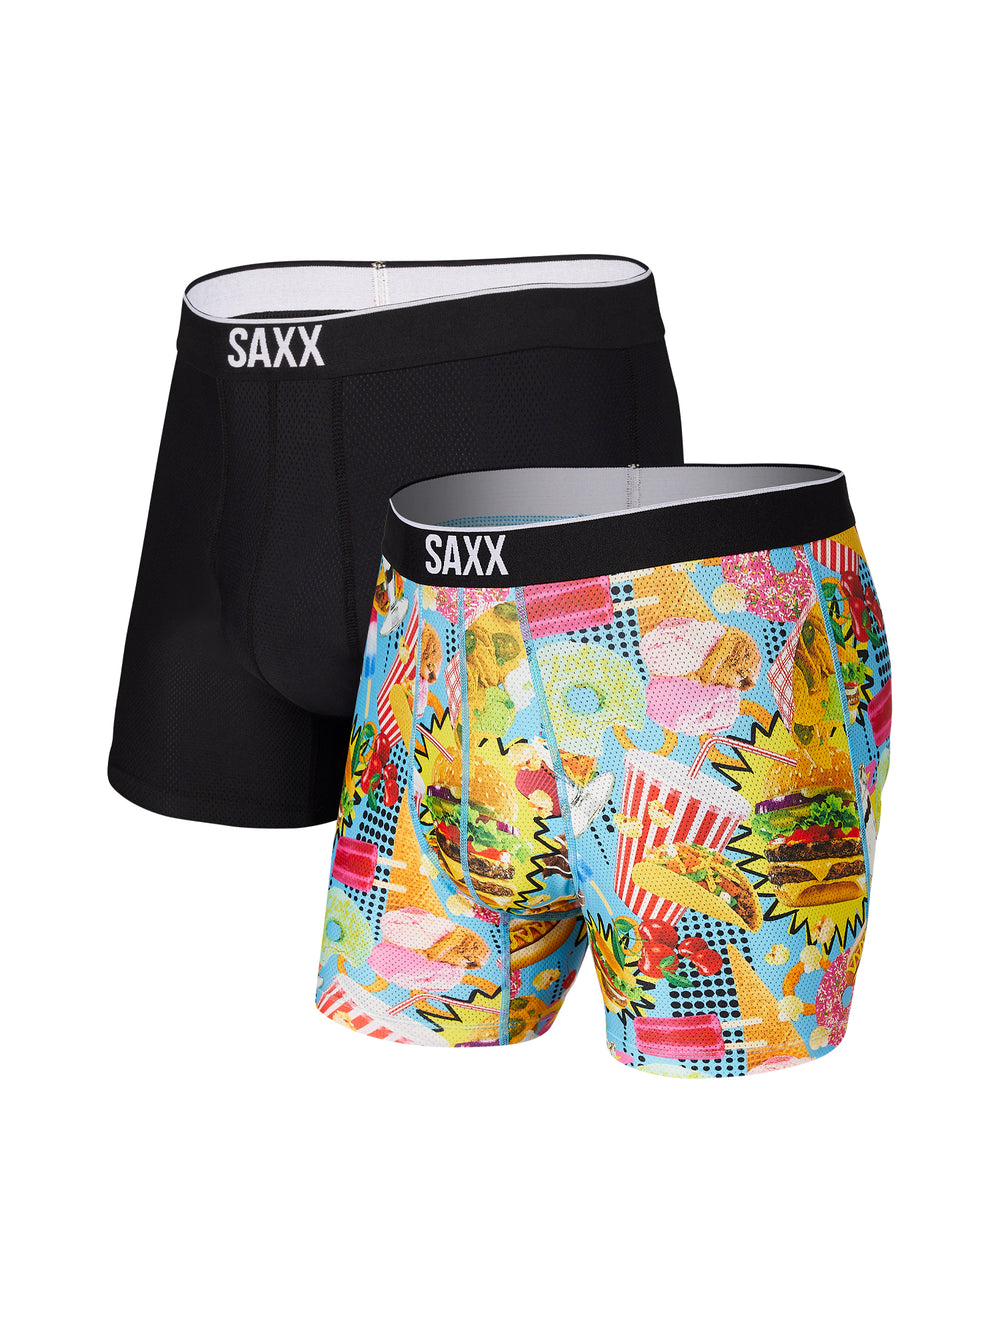 SAXX VOLT BOXER BRIEF 2 PACK - JUNK FOOD FIGHT - CLEARANCE